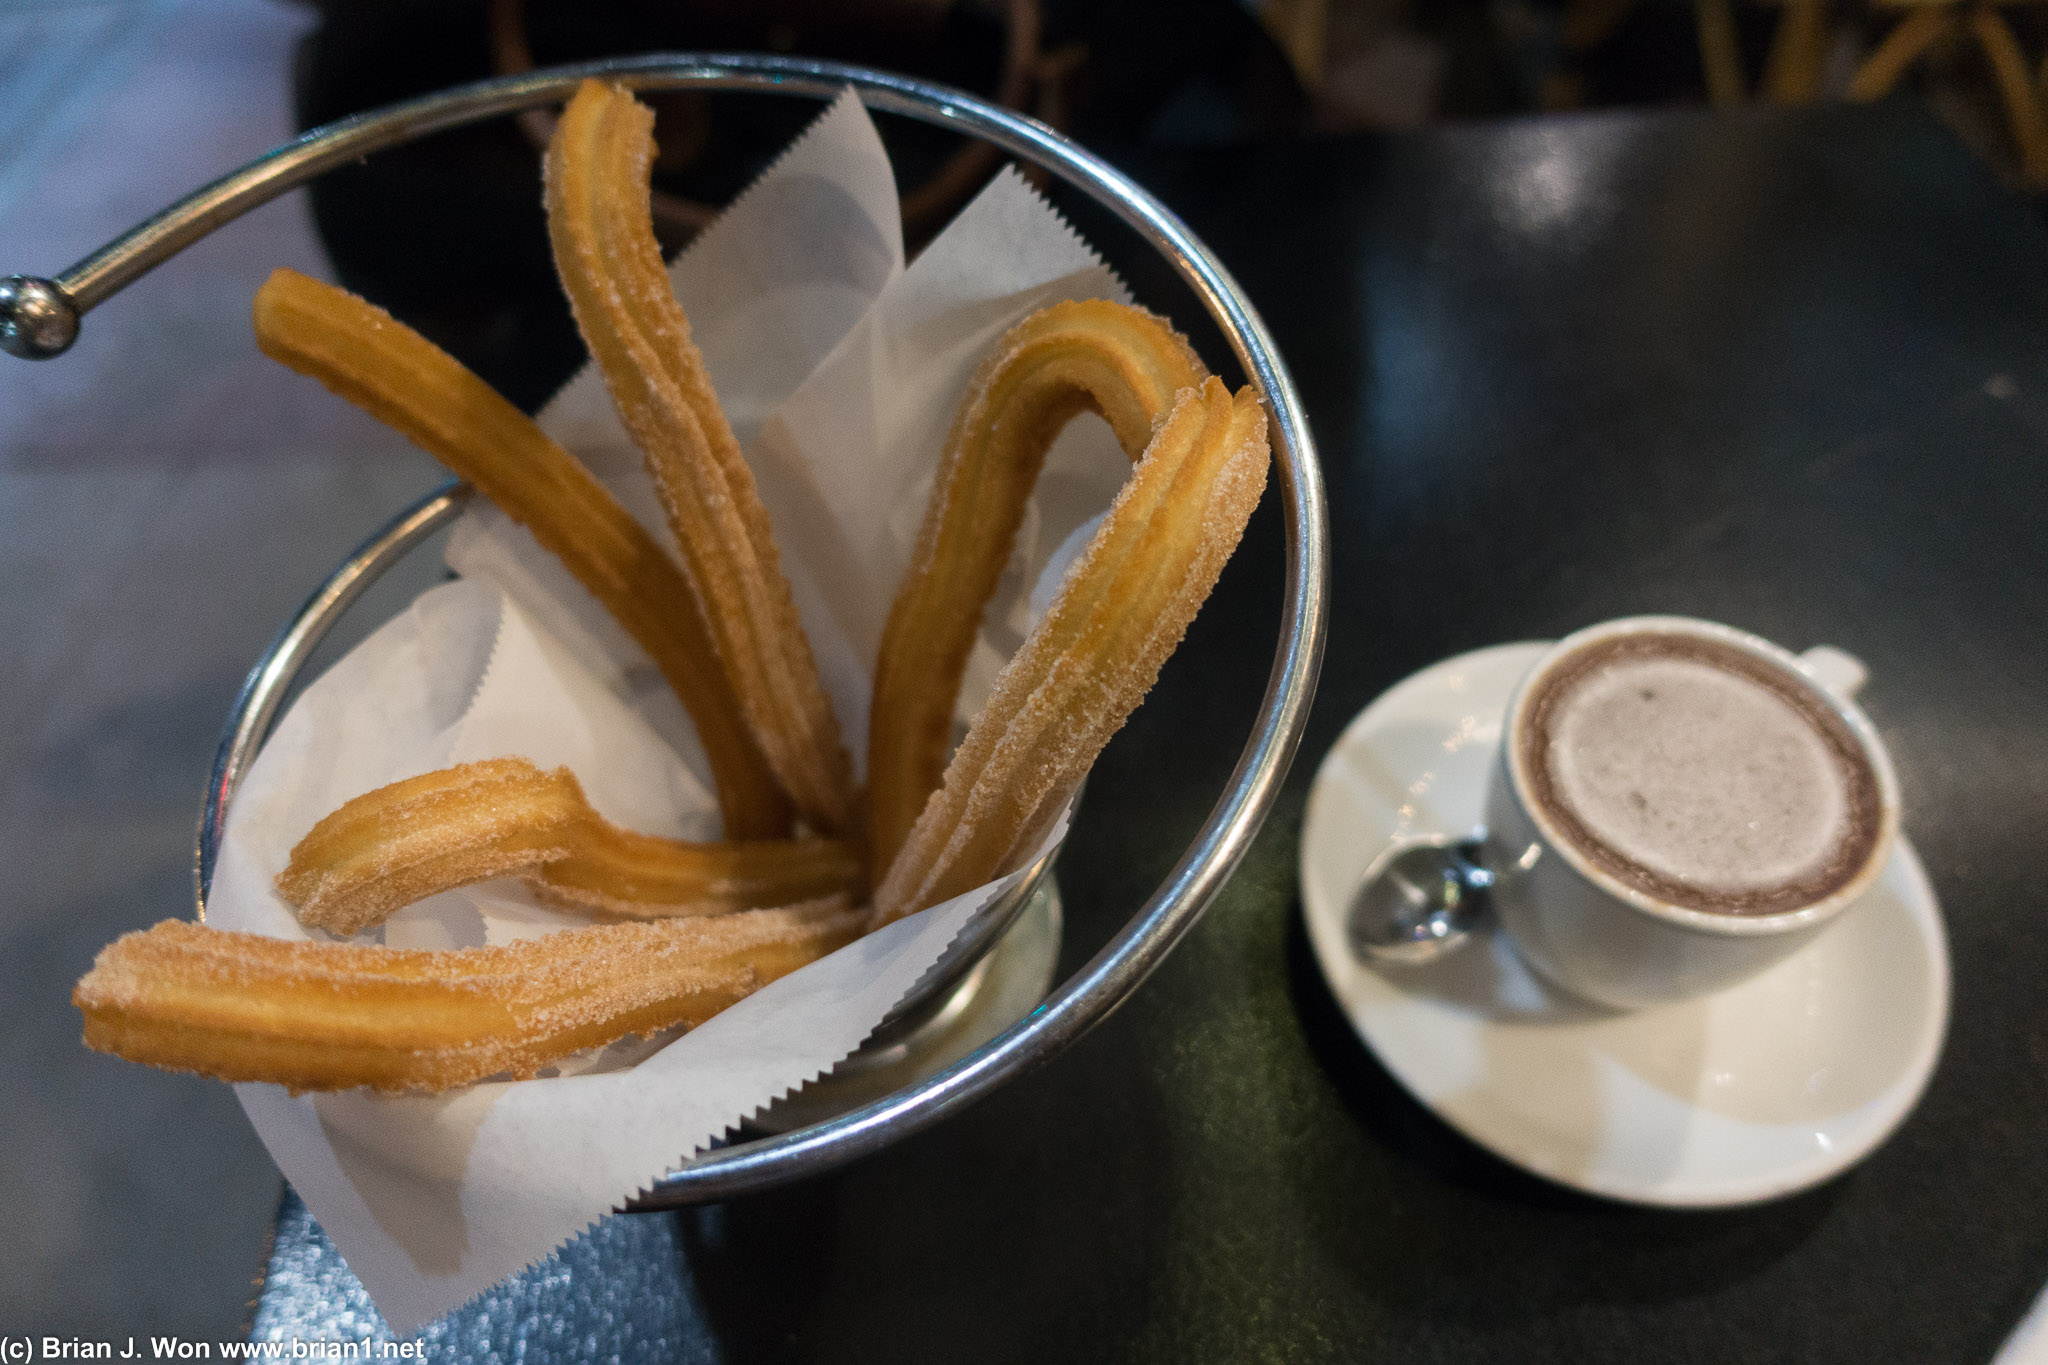 Churros are pretty good by US standards, pretty blah by Spanish standards. Chocolate was good tho.